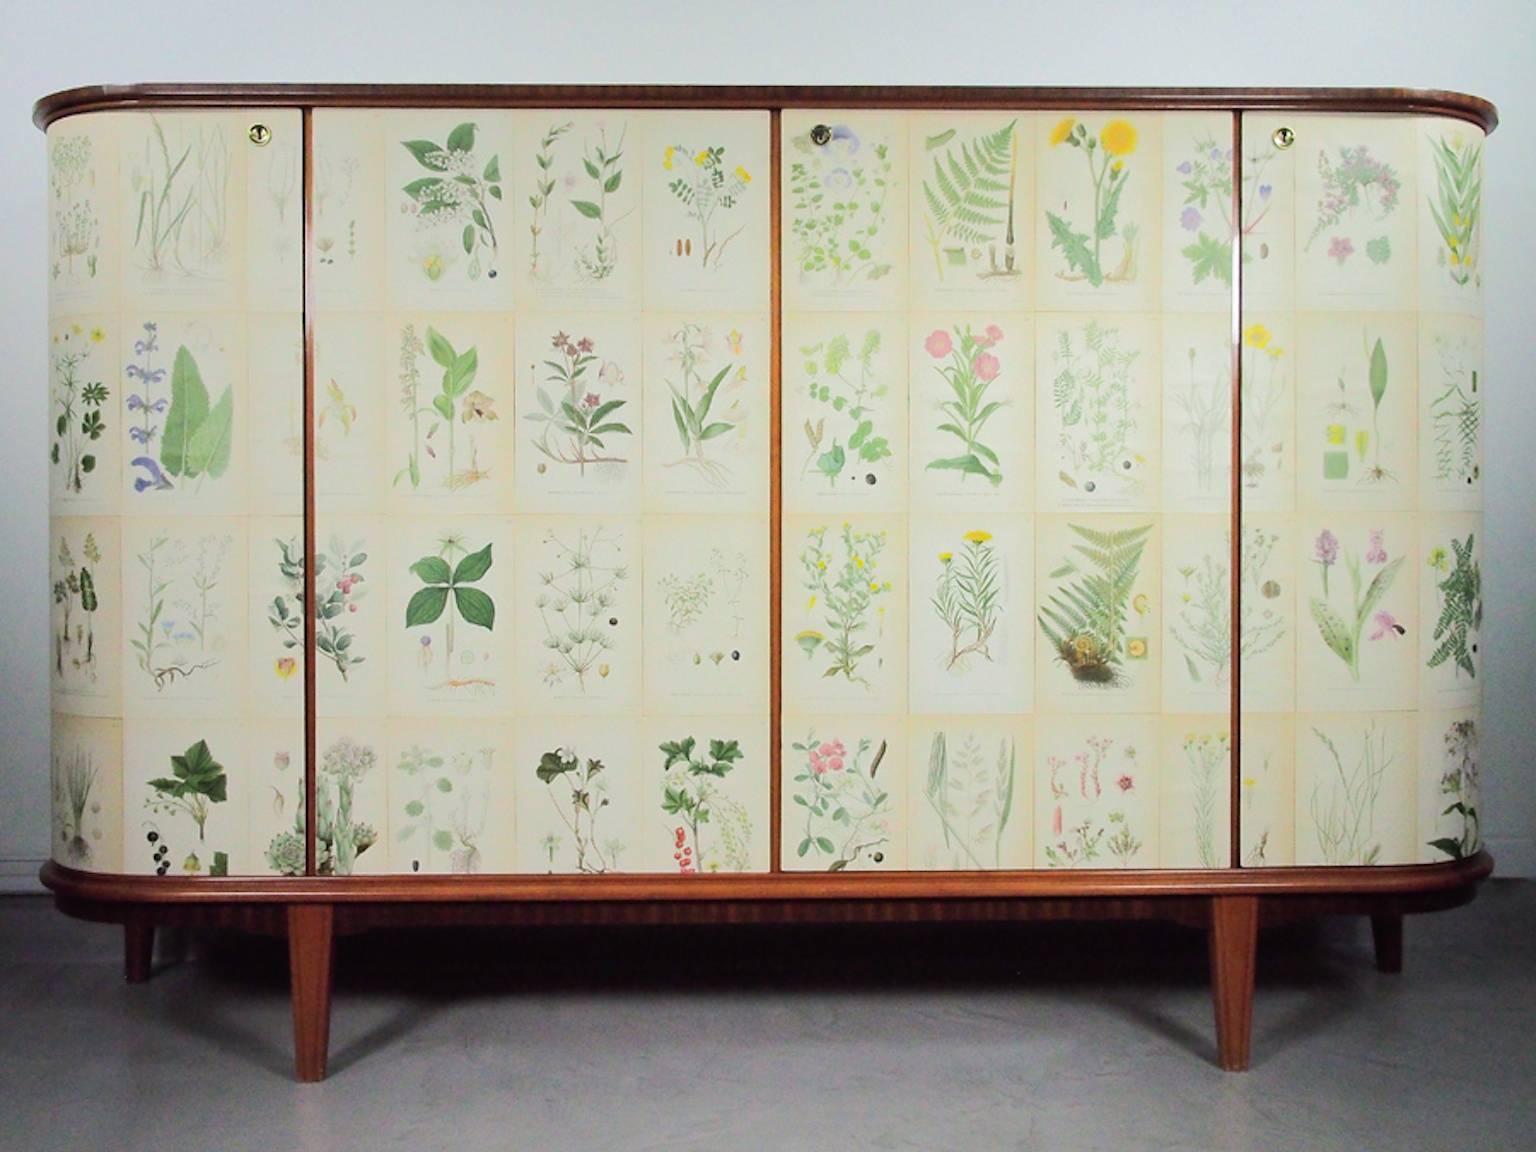 Beautiful wooden cabinet decorated with illustrations from the book 